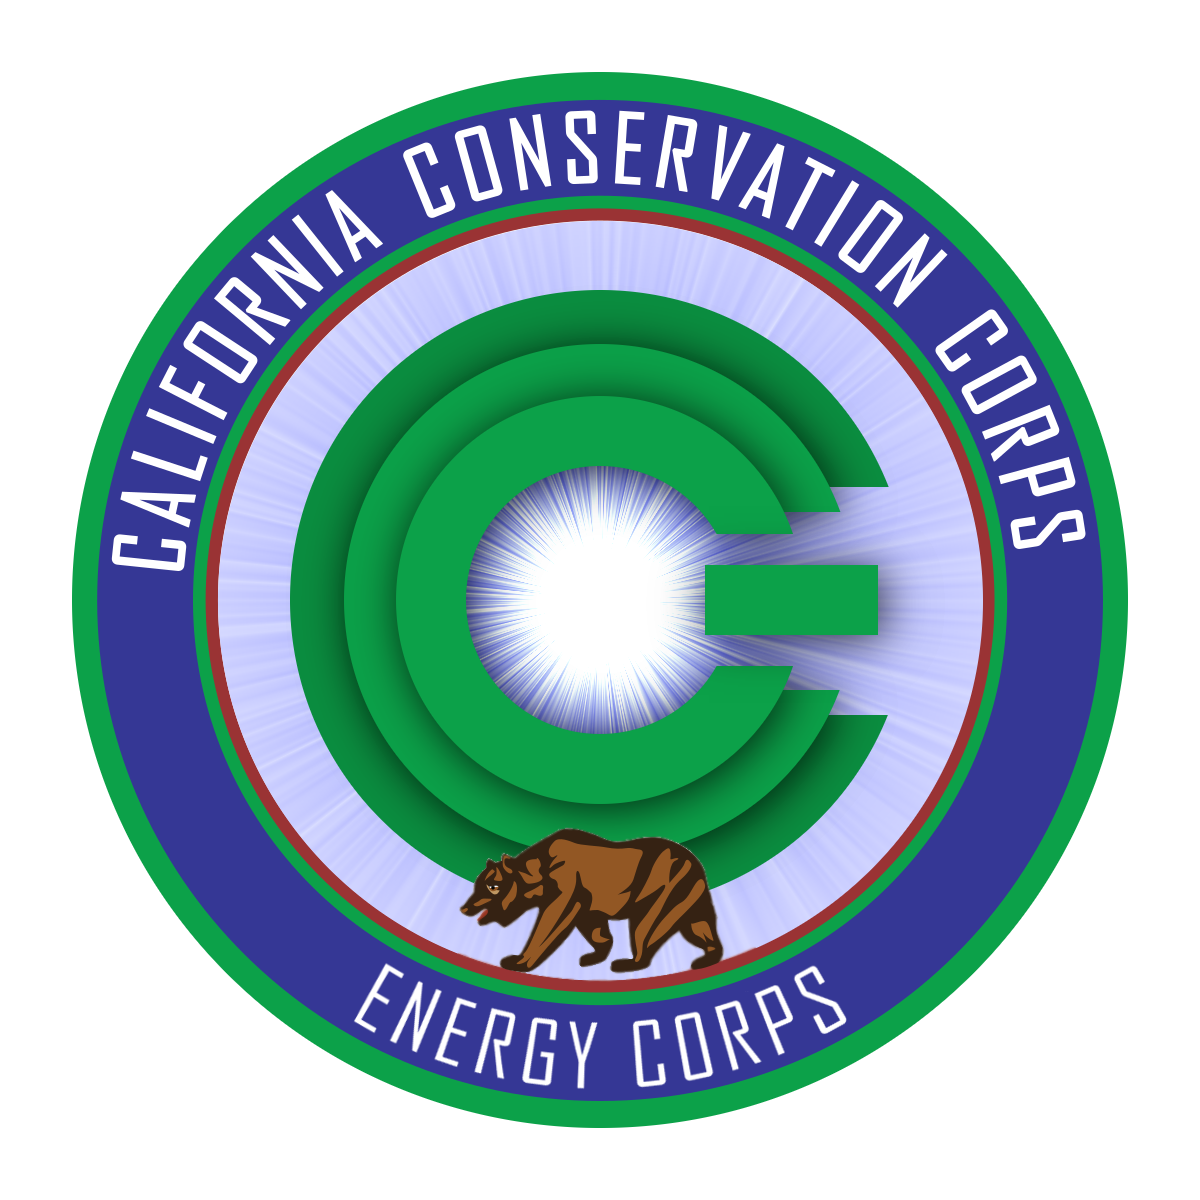 CCC Energy Corps logo. Reads: California Conservation Corps Energy Corps. Image depicts CCC as a computer power button, with light emanating from the center and a grizzly bear walking inside a circle.